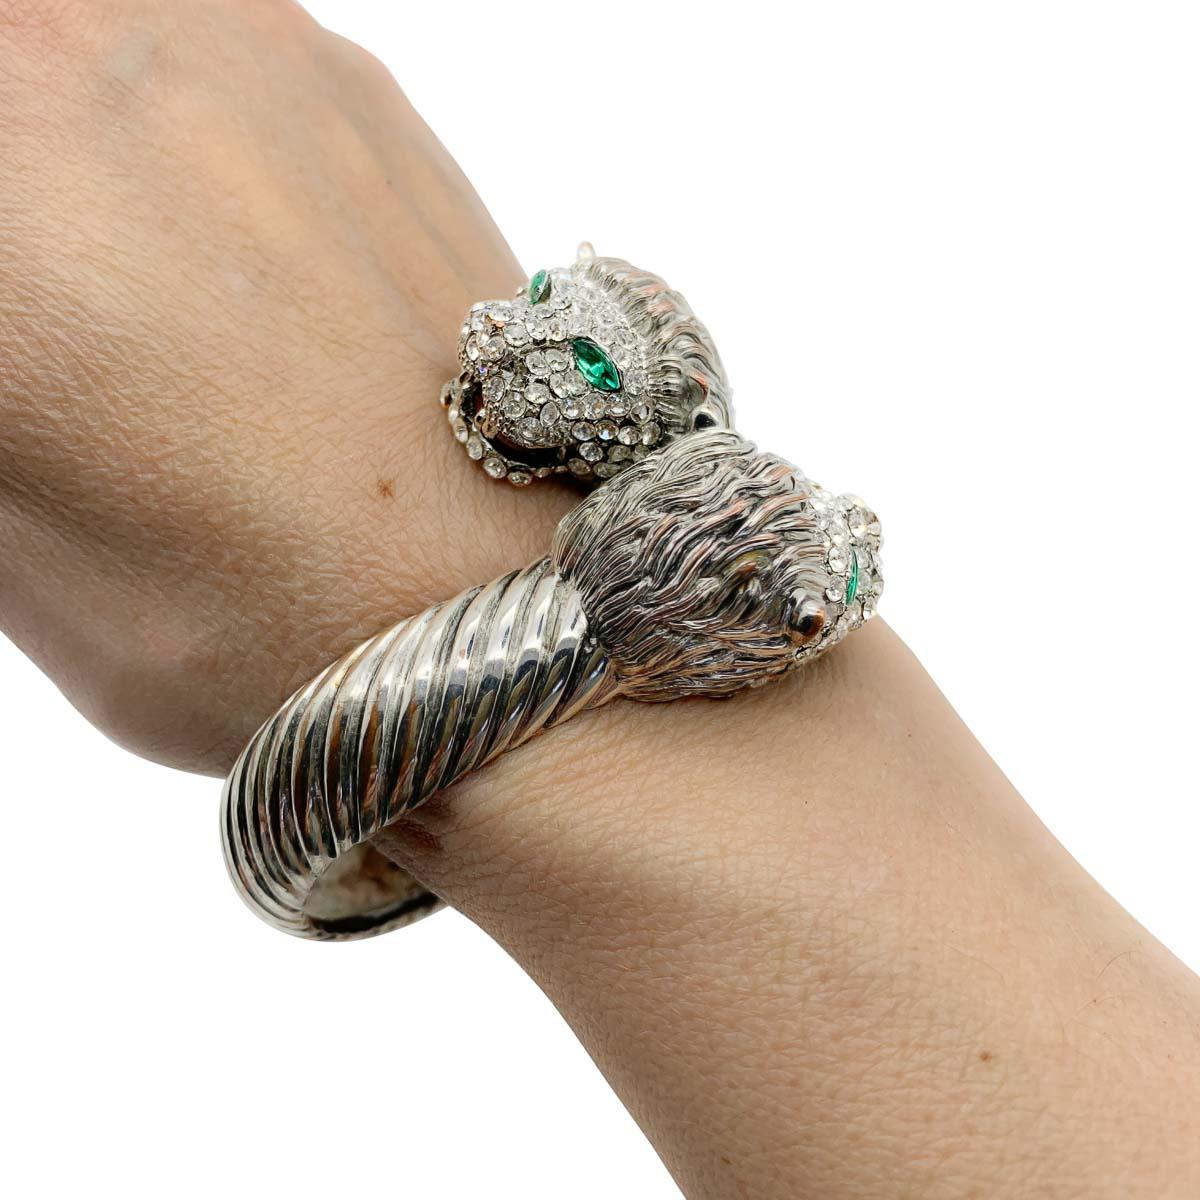 A fabulously ferocious vintage Lion clamper bracelet. Featuring a double header of Lions embellished with crystal stones and piercing green marquise crystal eyes.

Vintage Condition: Very good overall with very light age-appropriate wear or